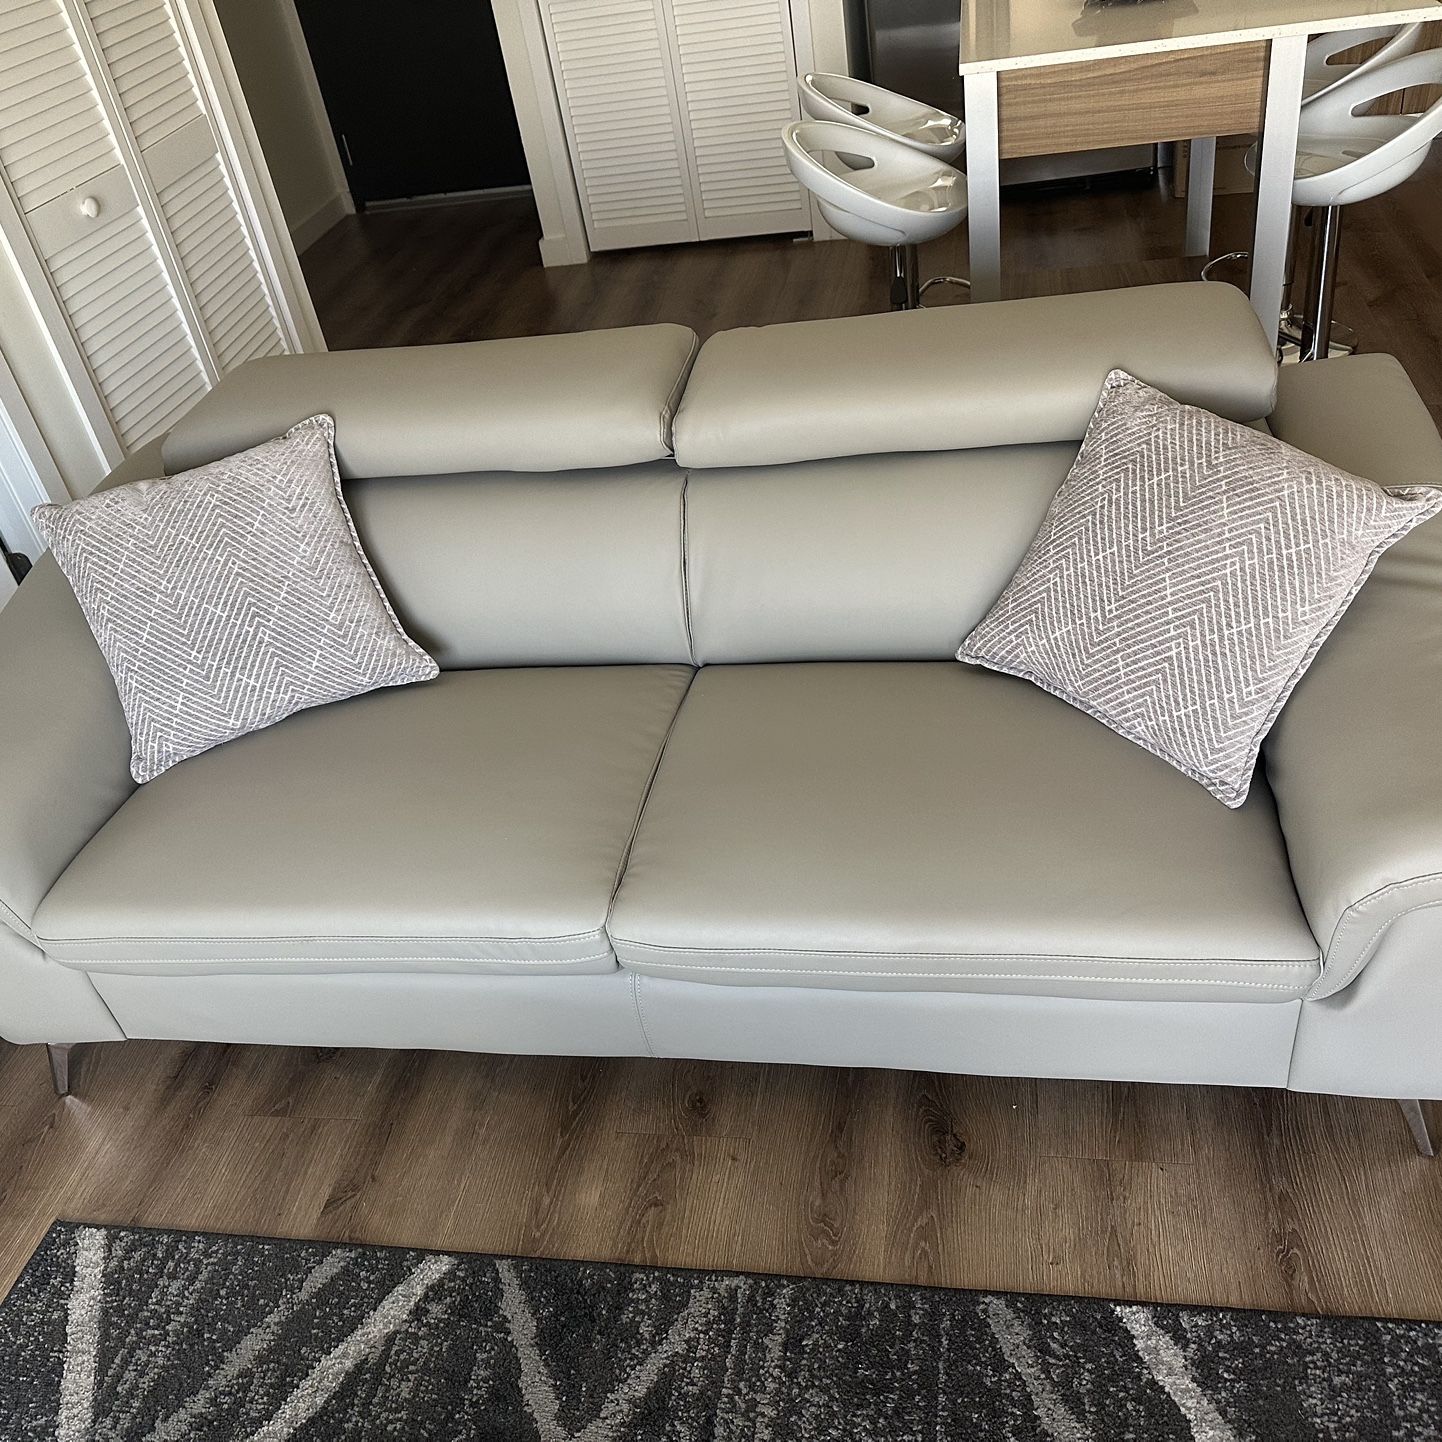 Brand New Sofa For Sale